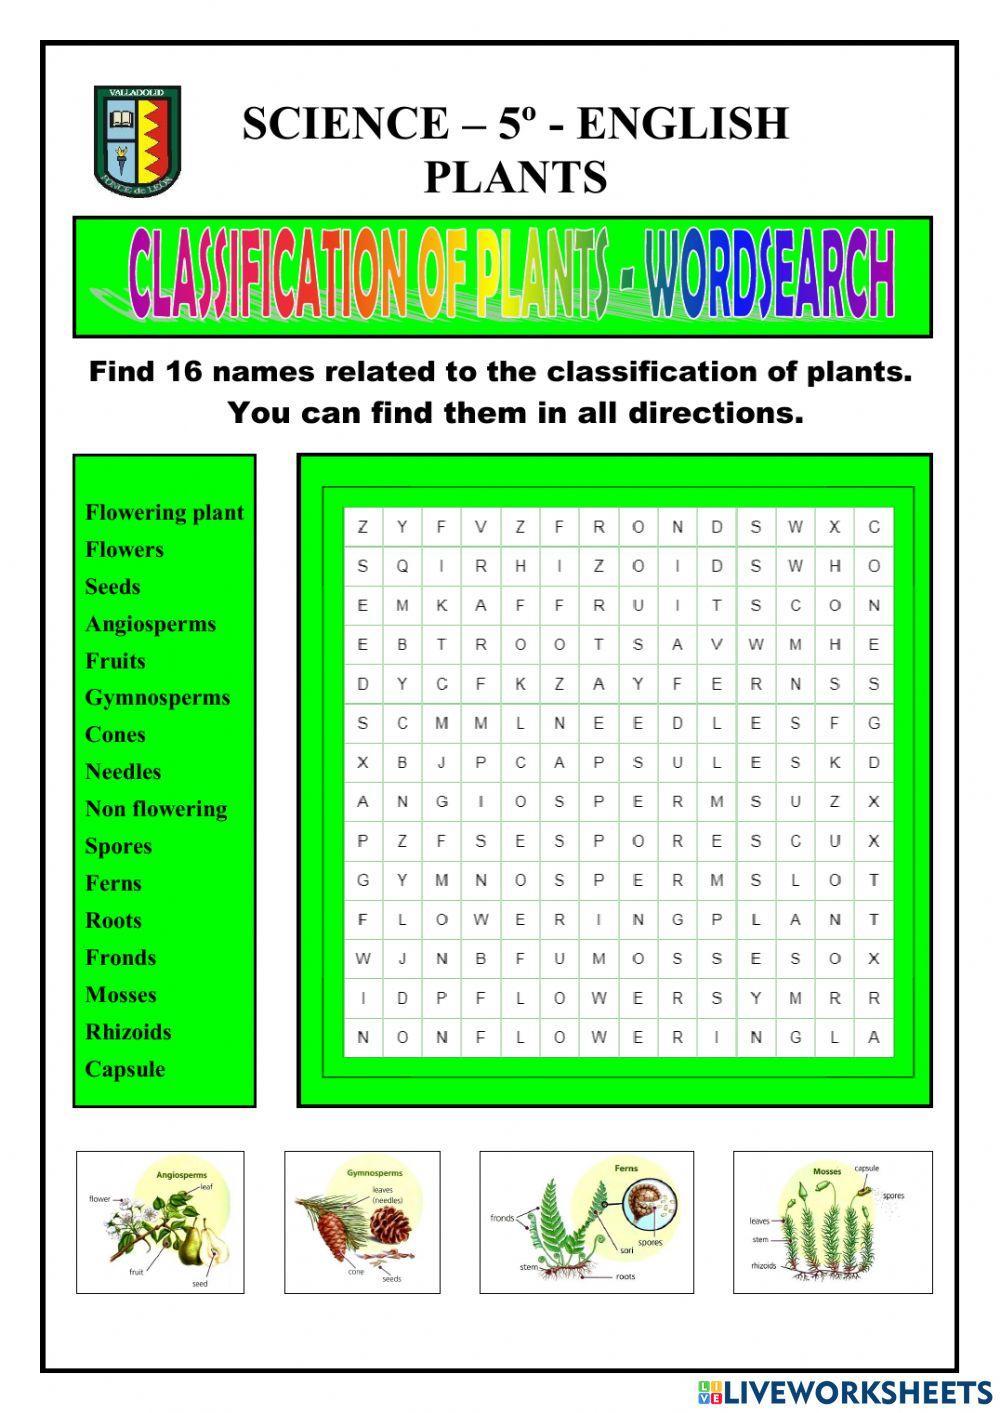 Classifications of the plants